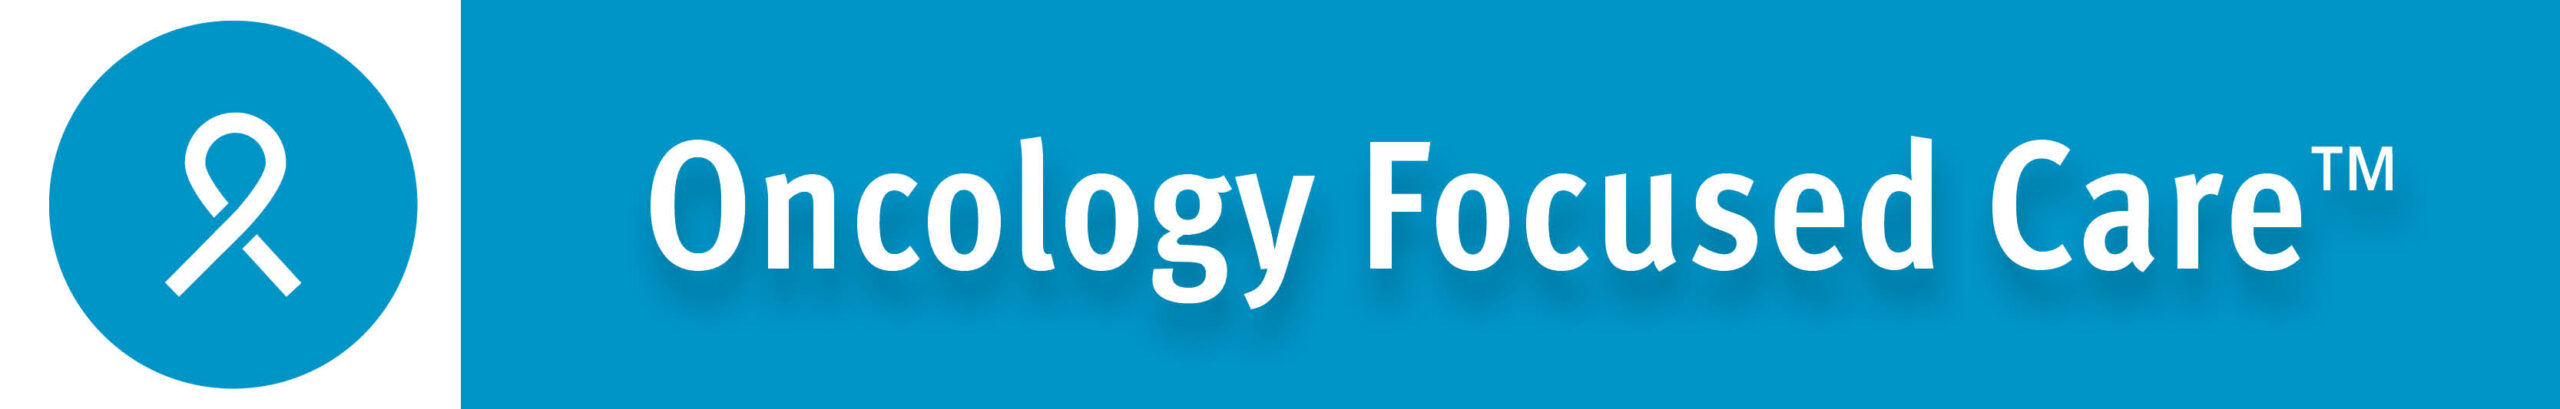 Oncology Focused Care